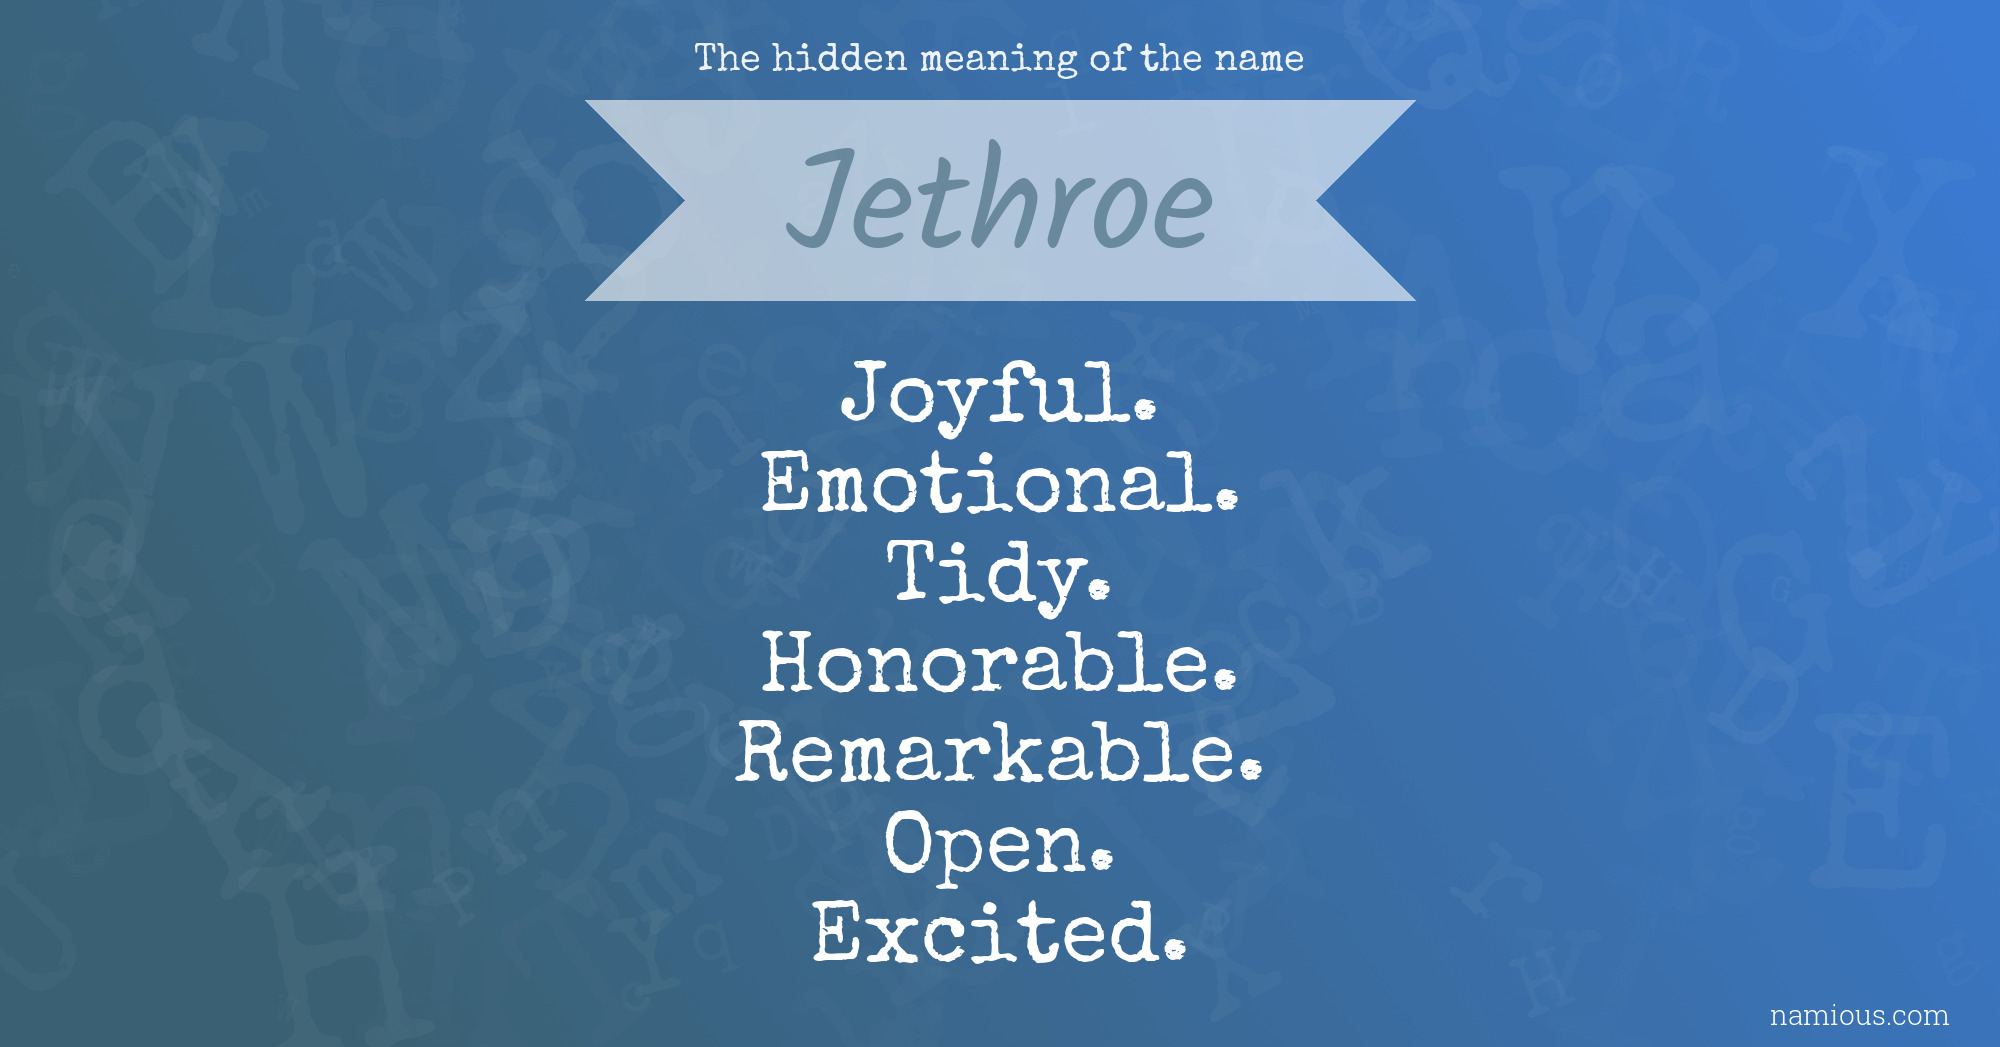 The hidden meaning of the name Jethroe